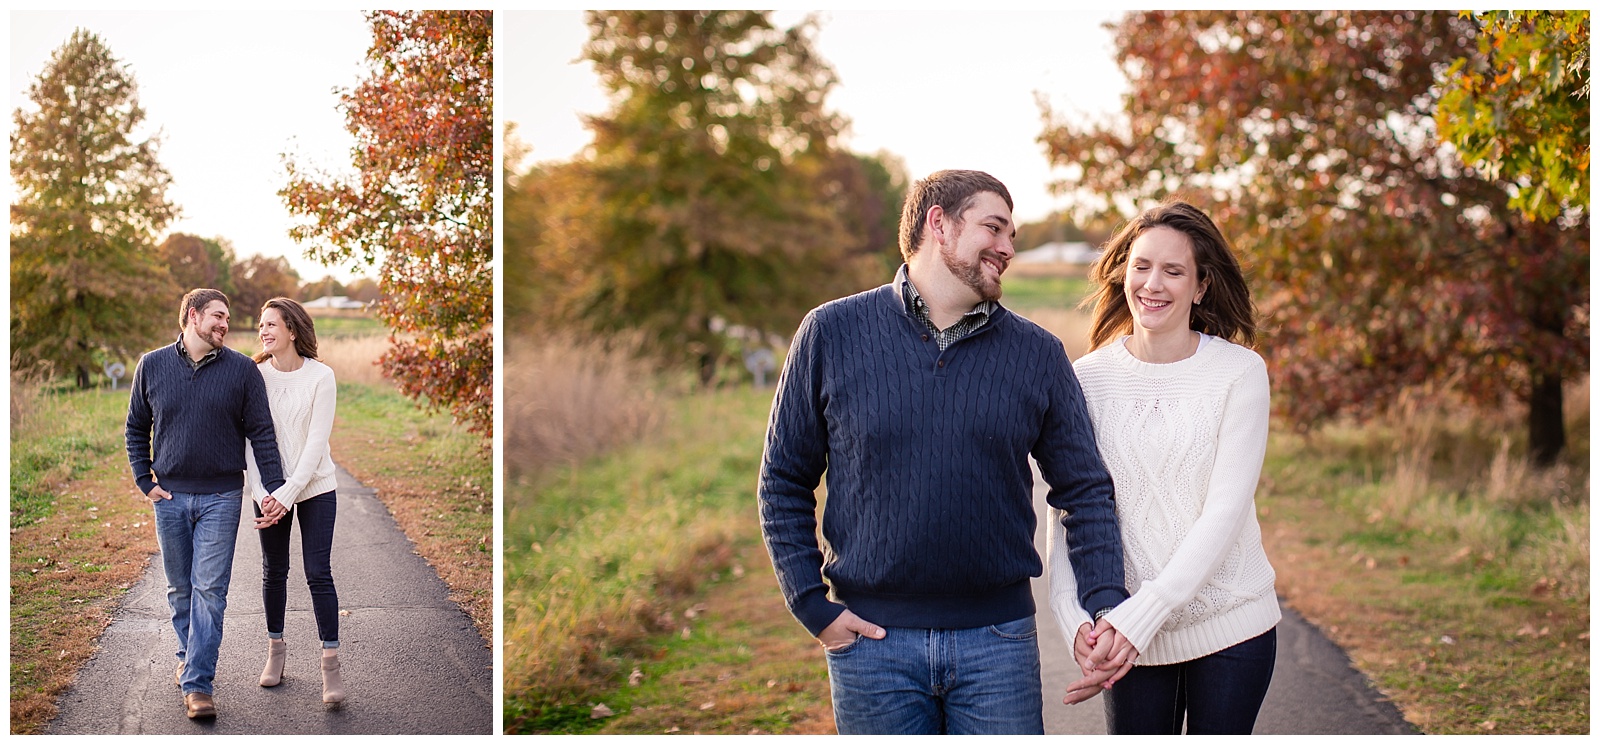 A St. Joseph engagement session at Youngdahl Urban Conservation Area.